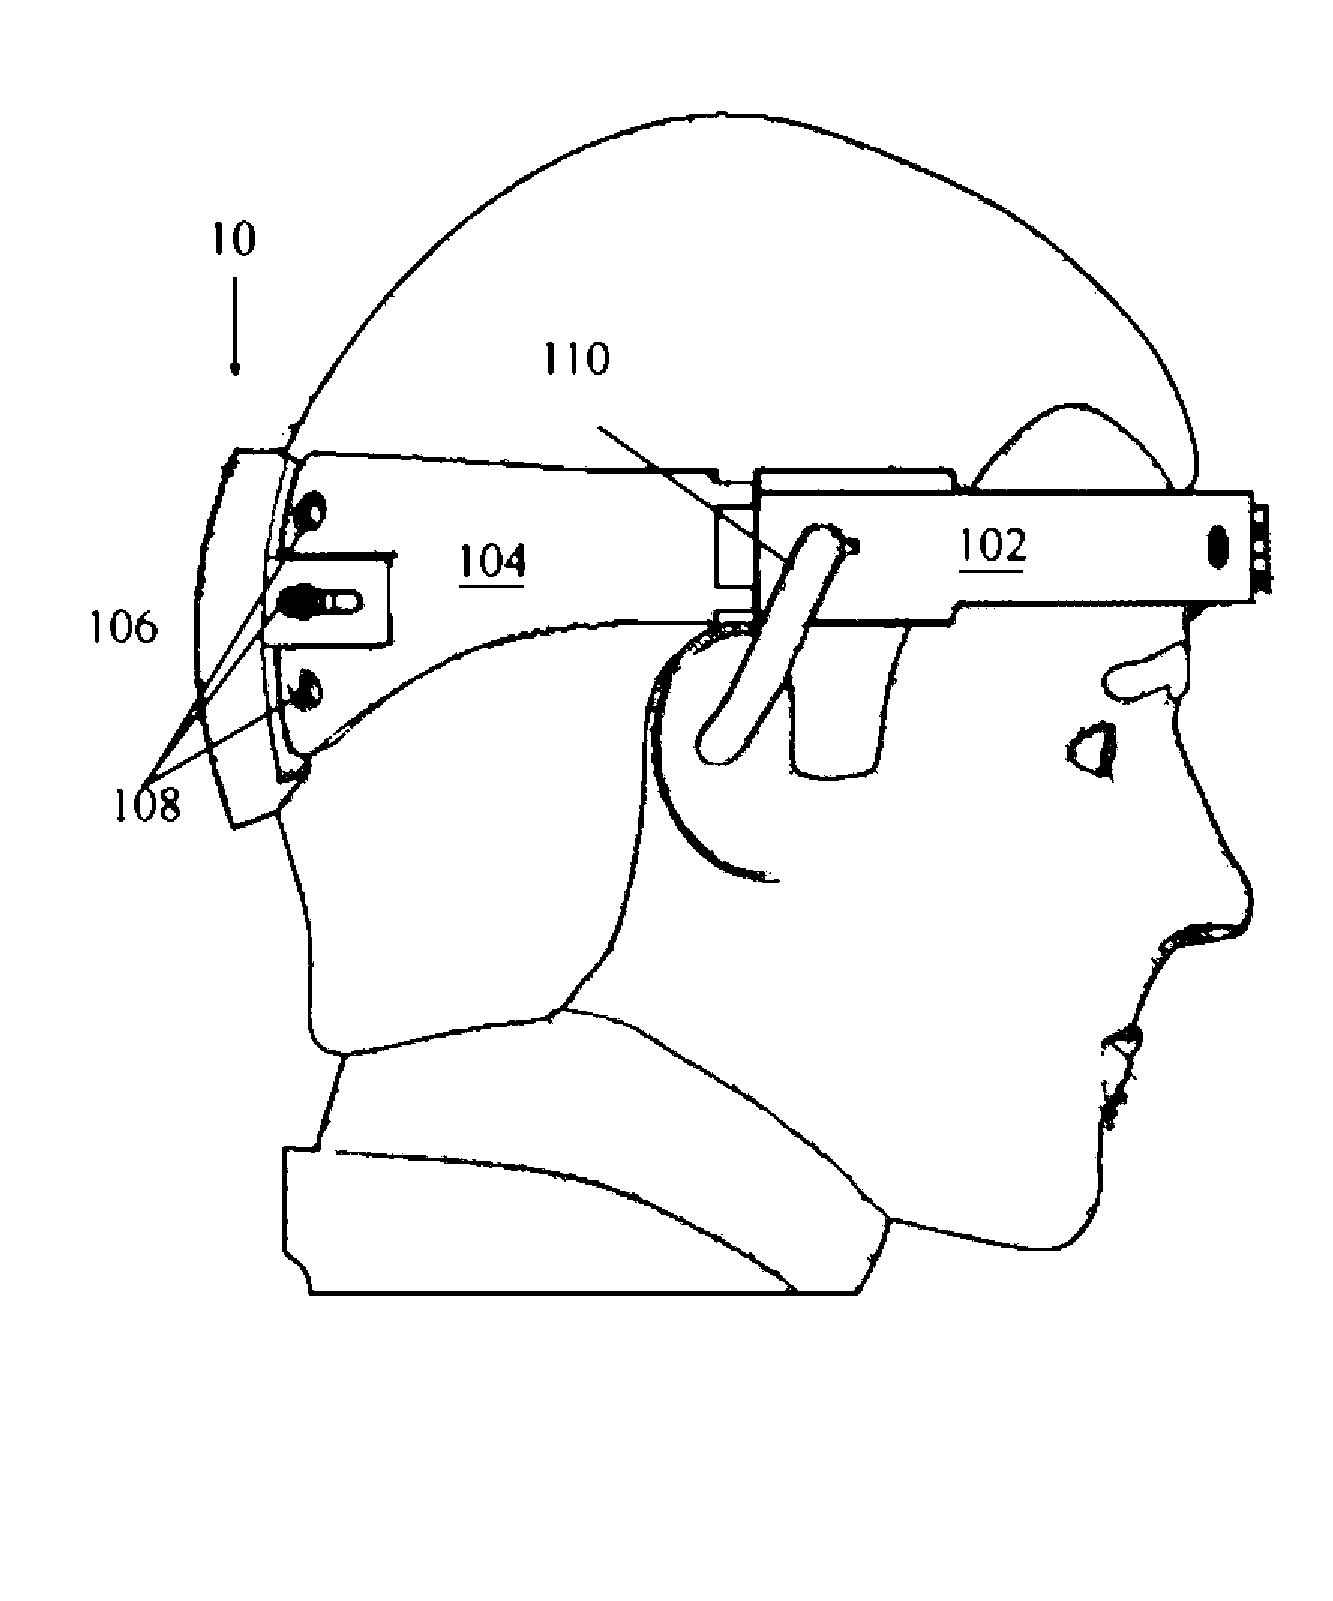 Method and device for positioning and stabilization of bony structures during maxillofacial surgery